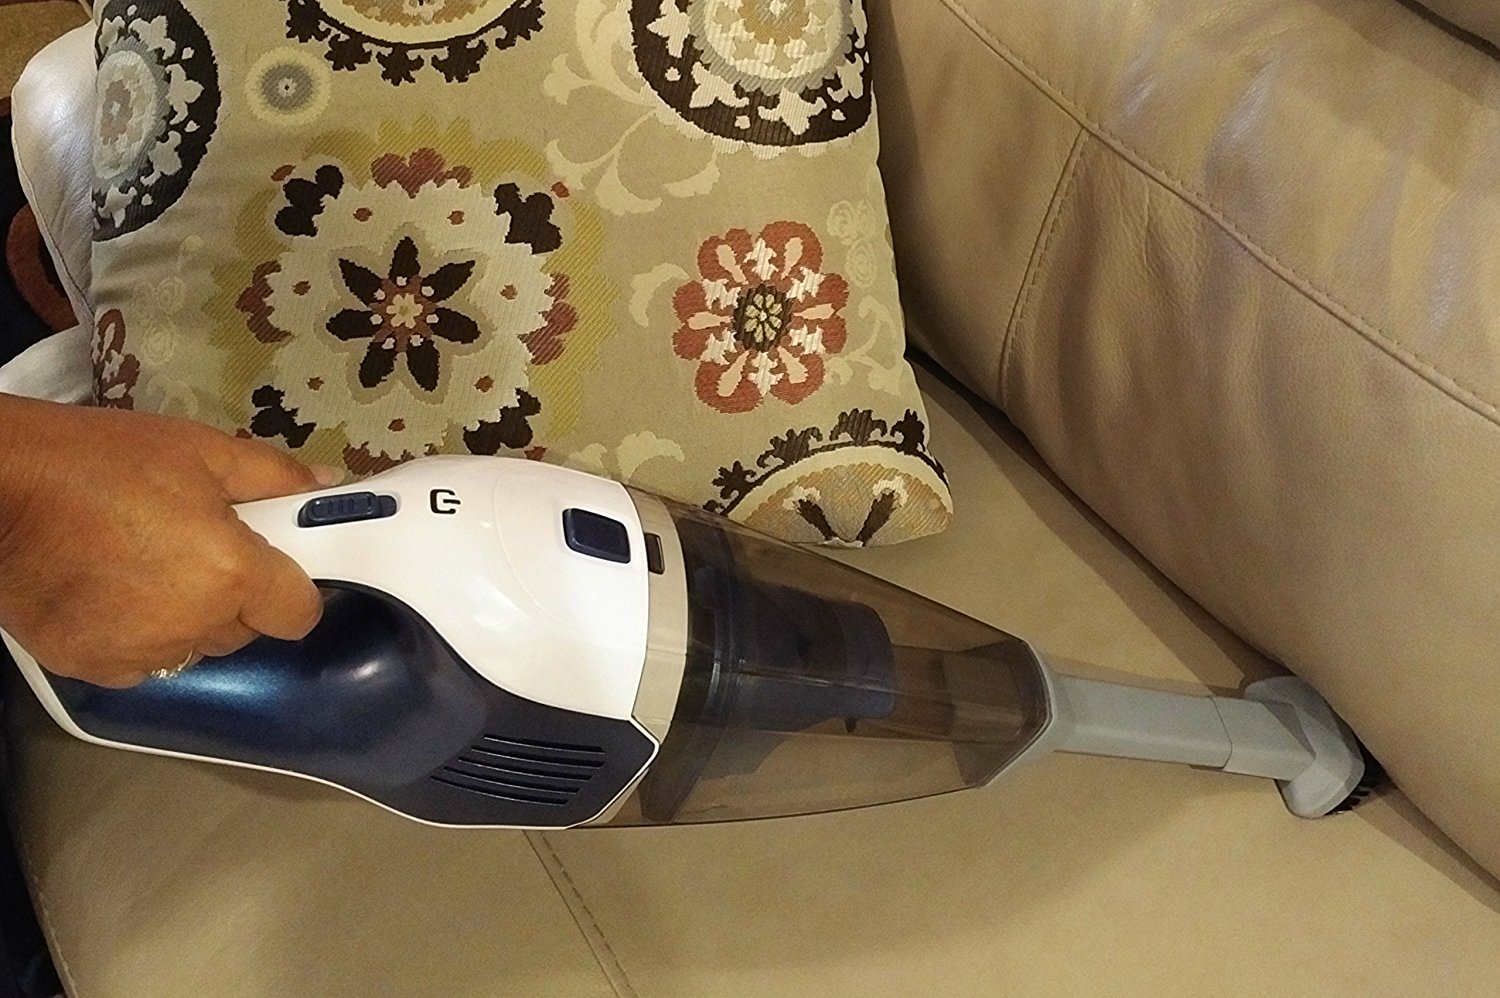 ReadiVac Storm Cordless Lithium-ion Wet & Dry Hand Vacuum - Home - Car - RV - Boat - NEW More Powerful (22.2 Volt) Versi